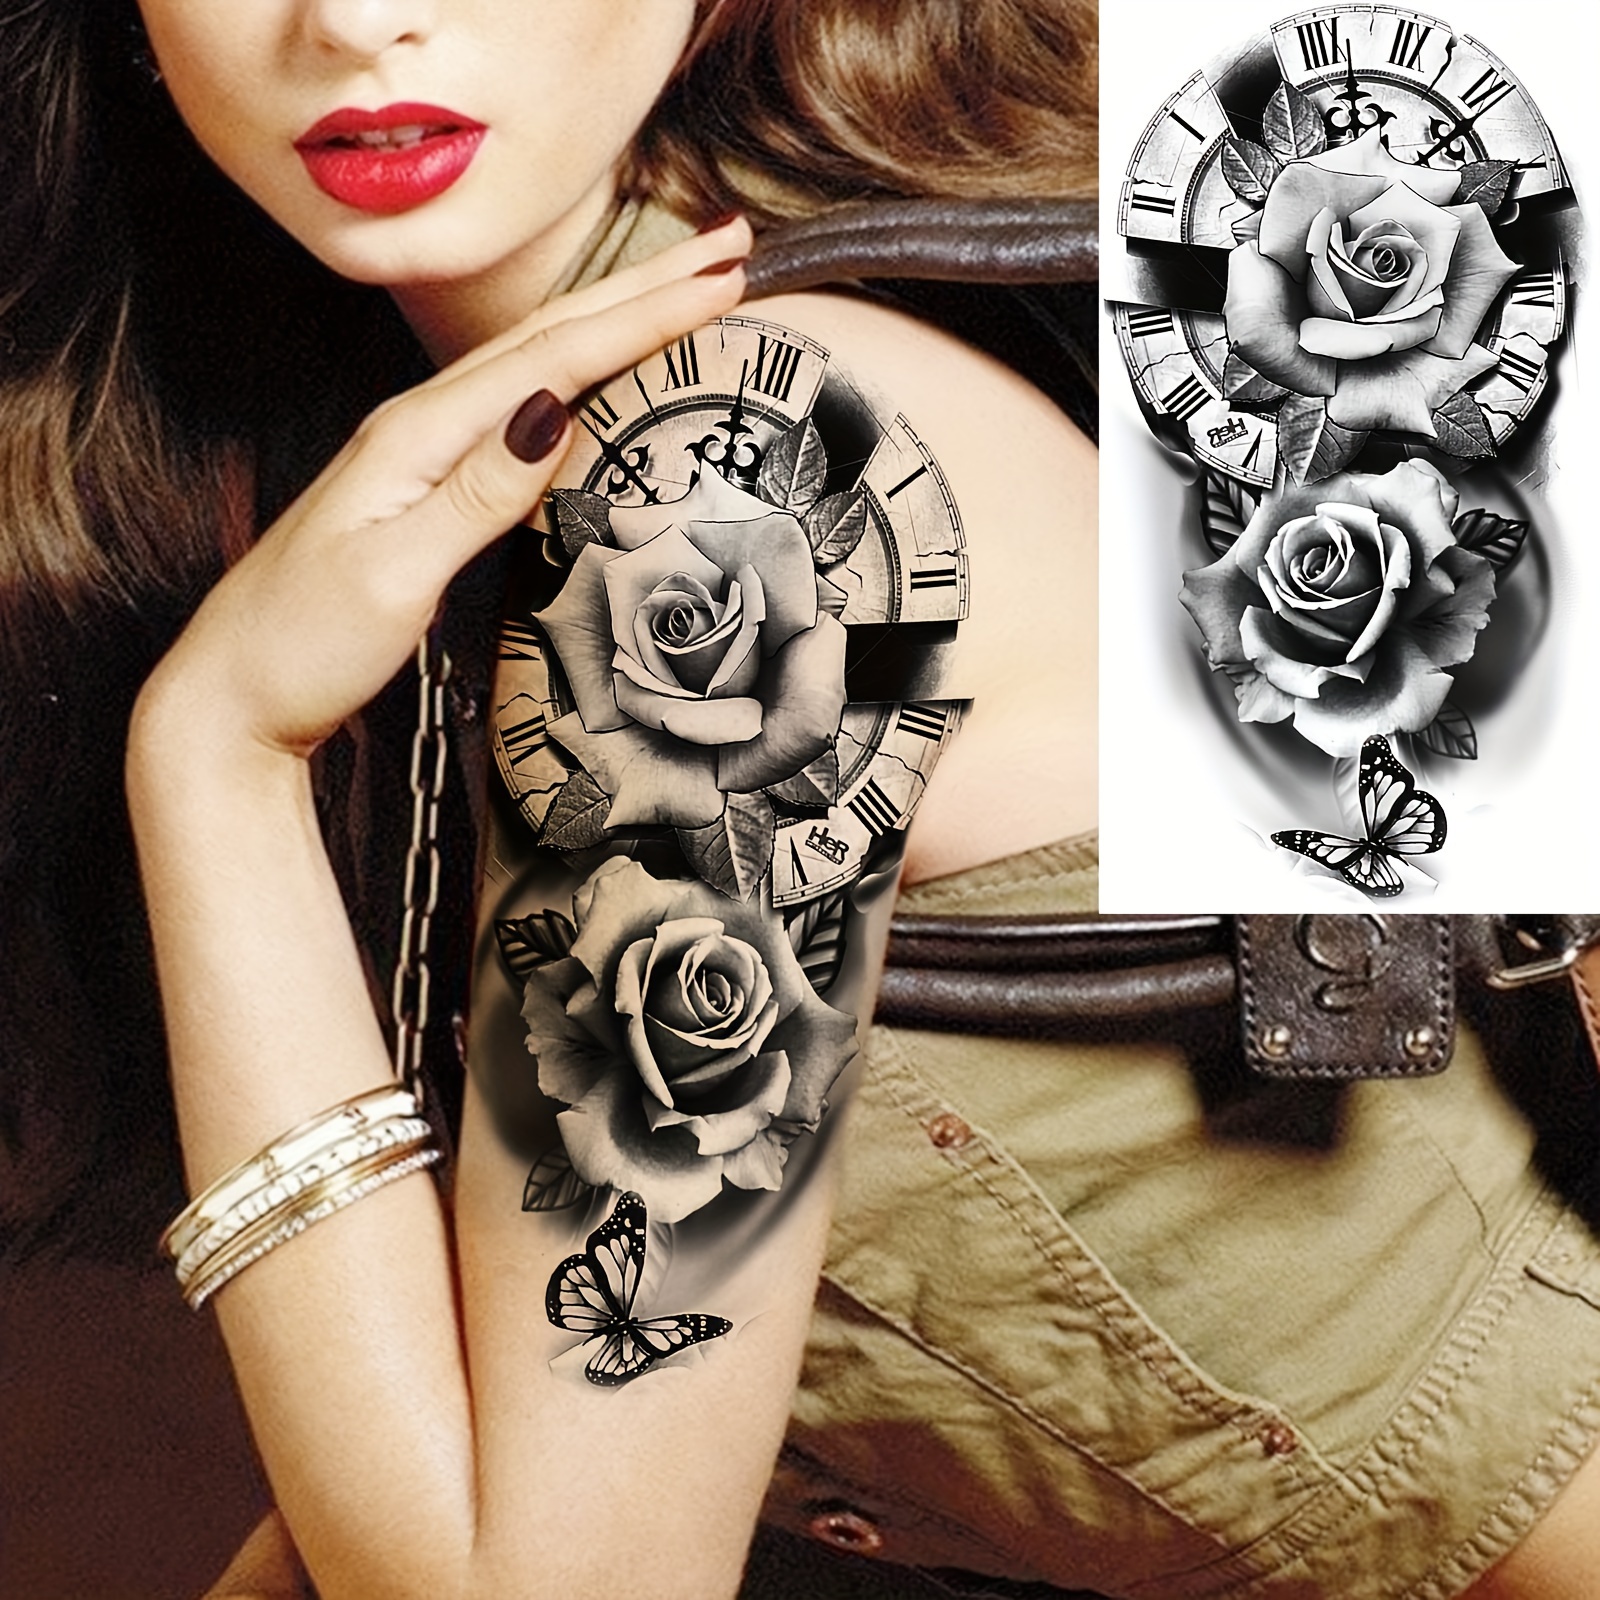 

Large 3d Rose Temporary Tattoo Sticker For Women, Waterproof Realistic Black Compass Clock Fake Tattoo Decals, Long-lasting Body Art For Adult Forearm Sleeve, Arm, Leg Makeup - 1 Sheet, Oblong Shape